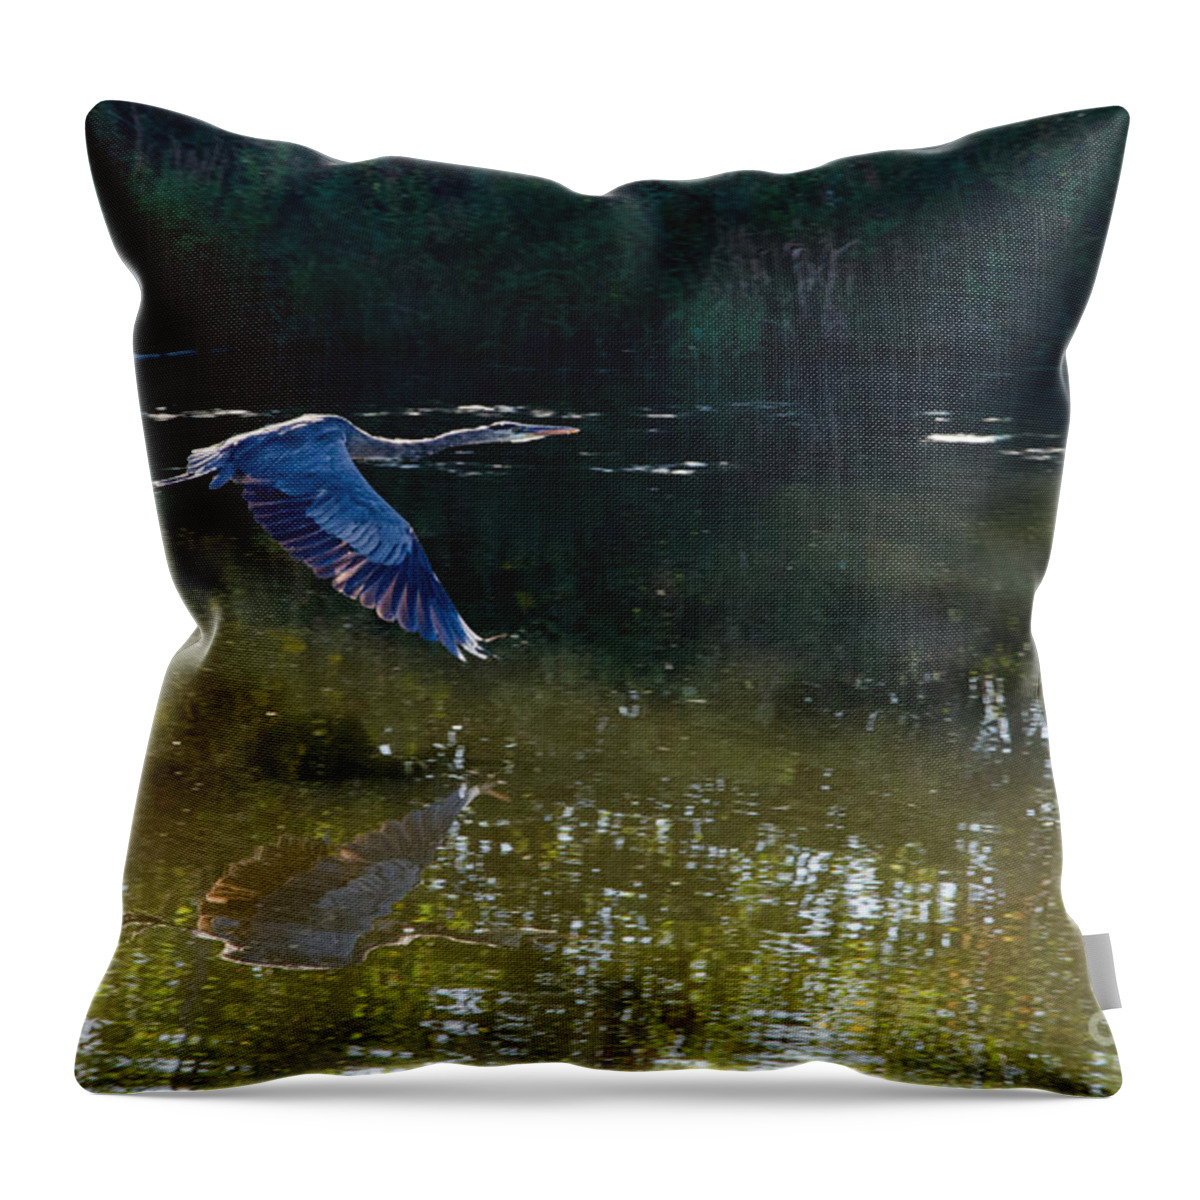 Heron Throw Pillow featuring the photograph Heron Flight by Laurel Best